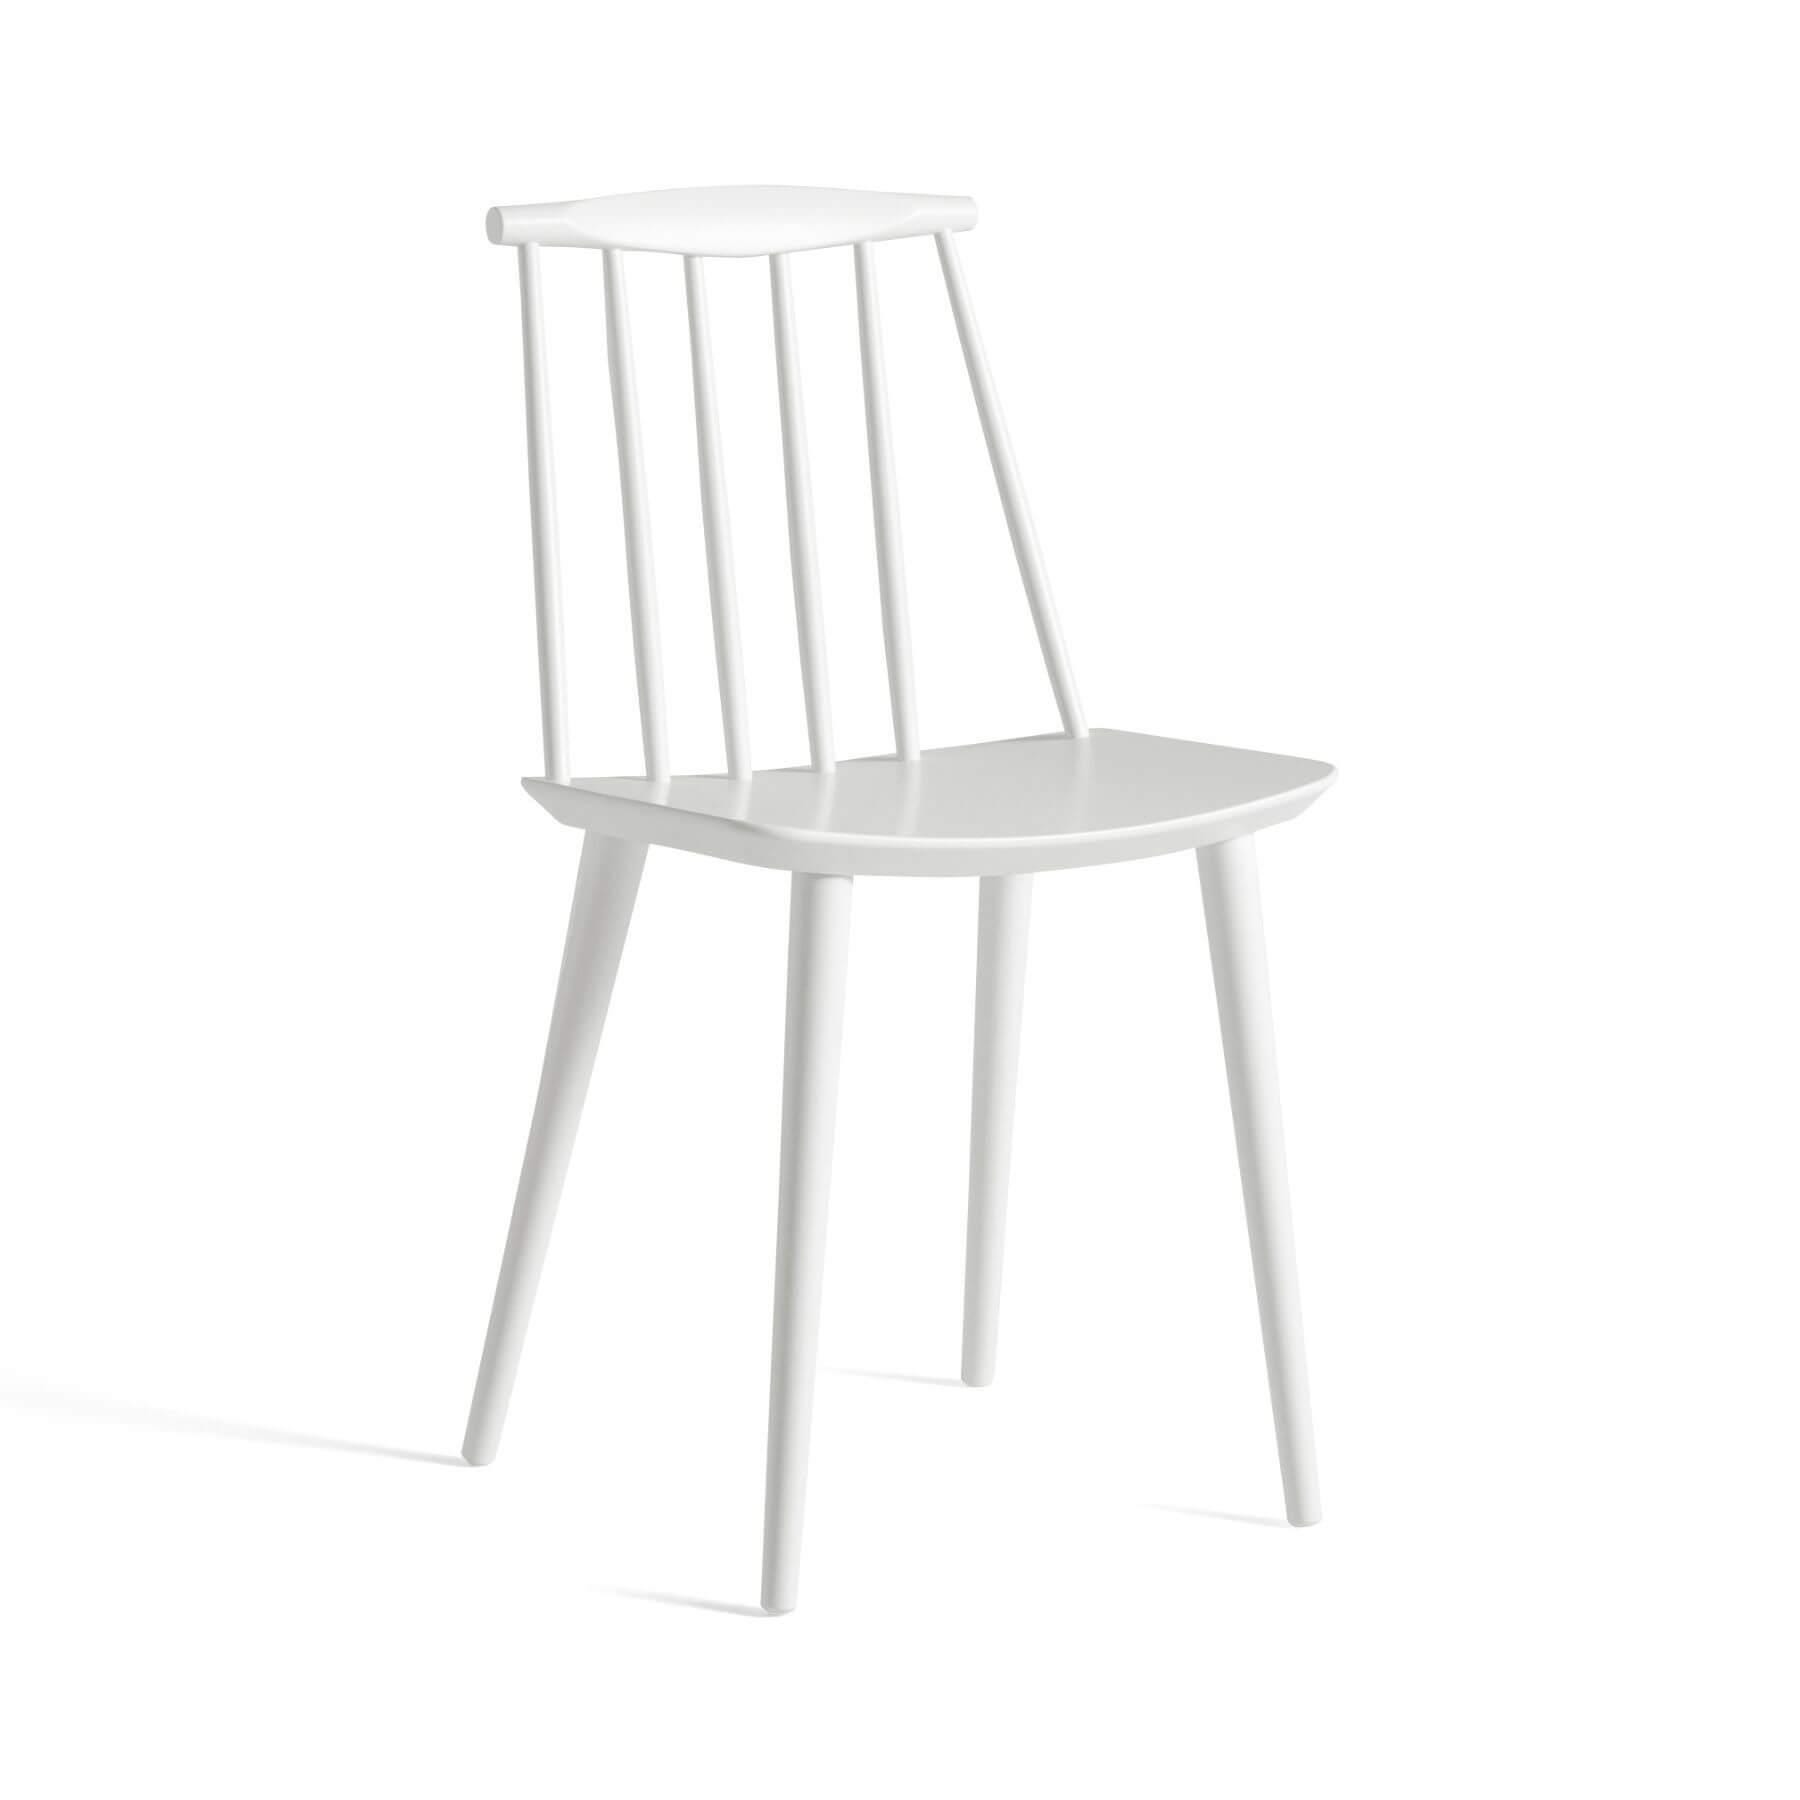 Hay Jseries 77 Dining Chair Beech Lacquered White Felt Gliders Designer Furniture From Holloways Of Ludlow